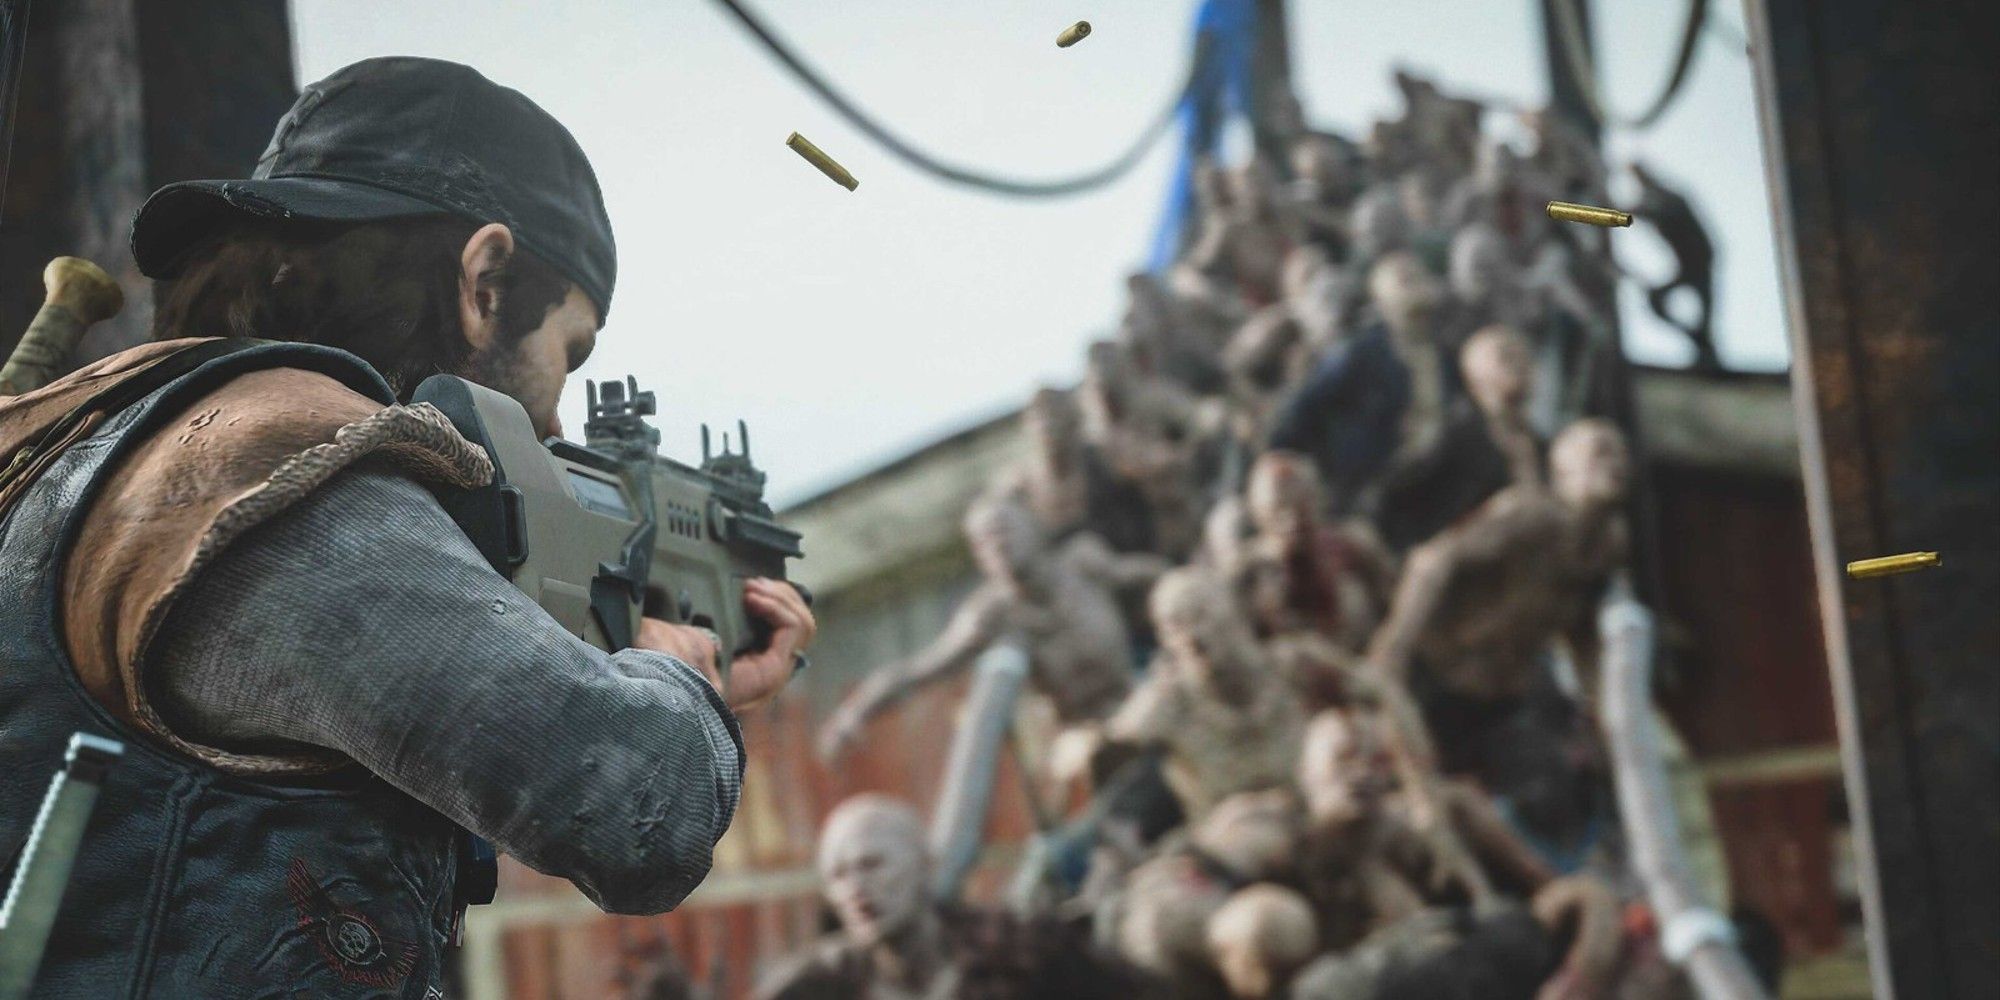 Days Gone Studio Confirms New Open-World Game With Multiplayer